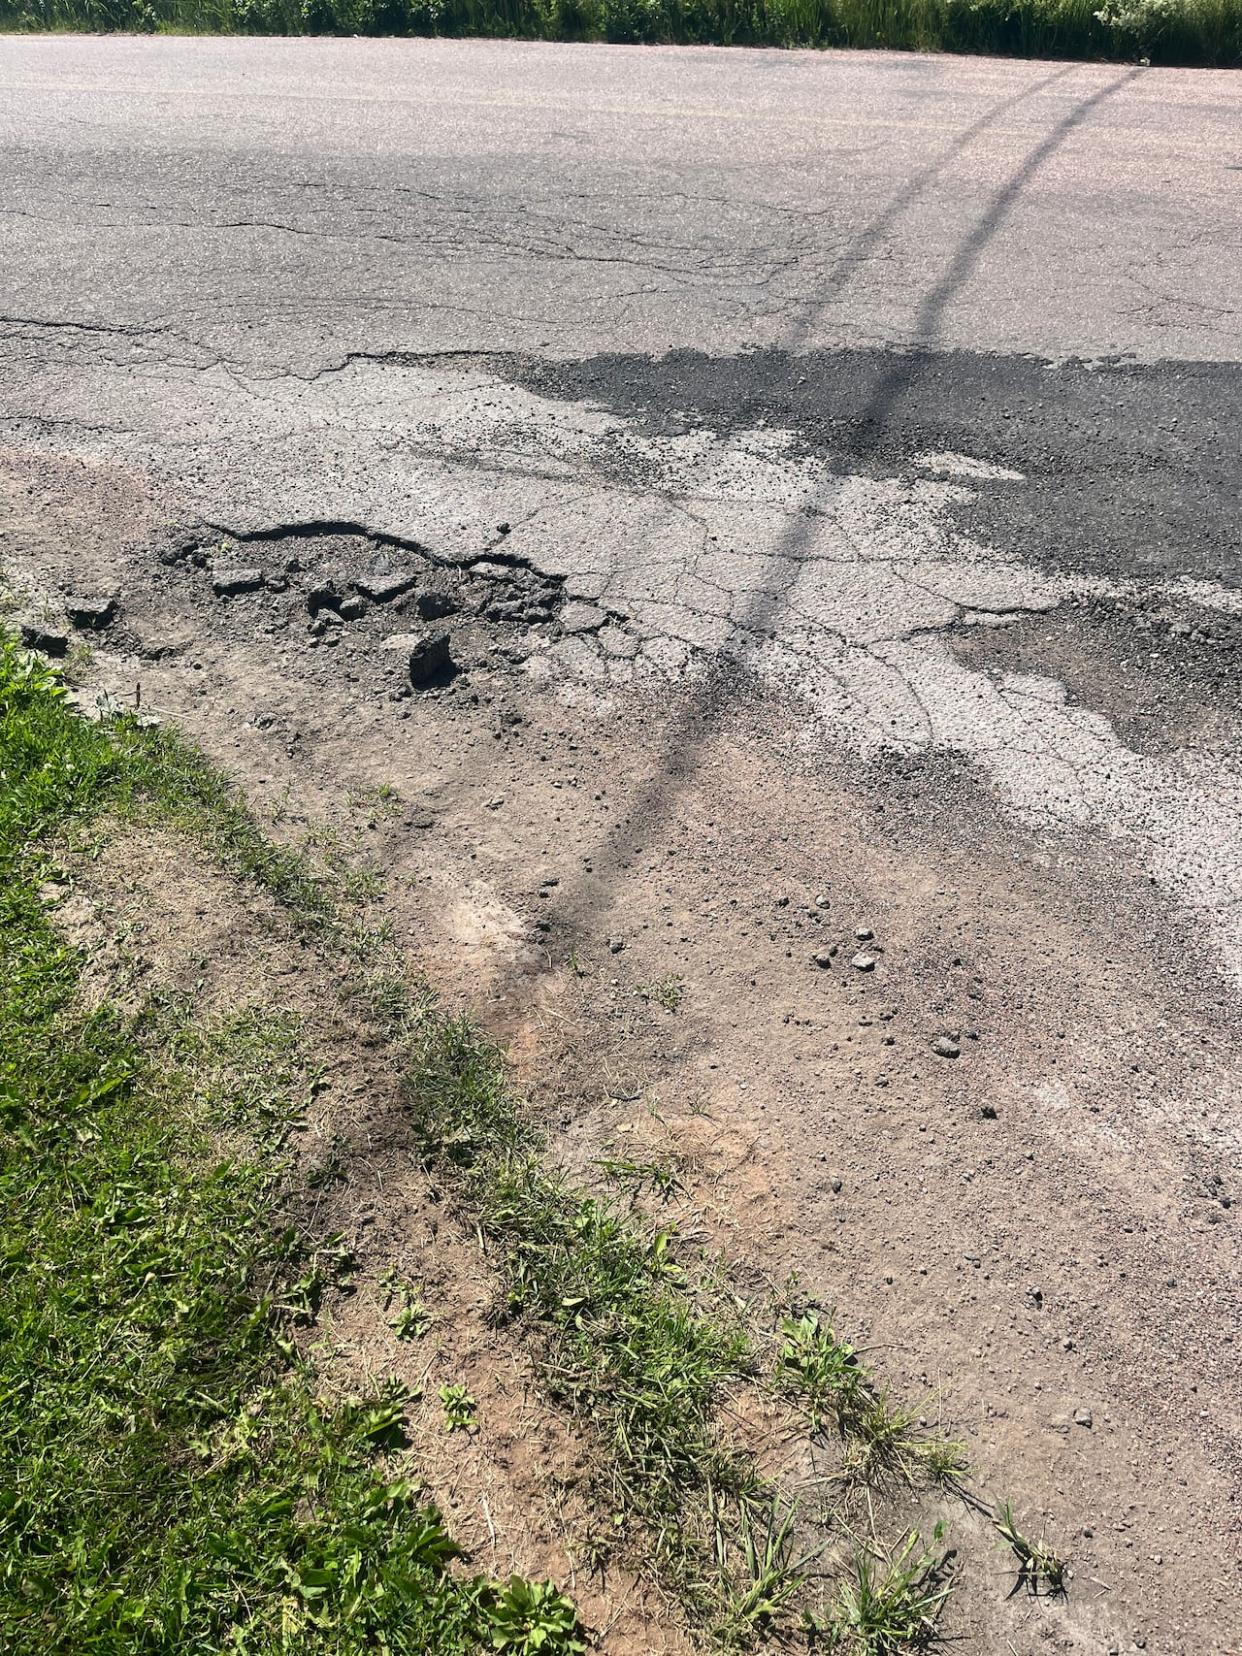 Parts of Route 955 are crumbling and some locals say the government isn't doing enough to fix the road. (Jonna Brewer/CBC NB - image credit)